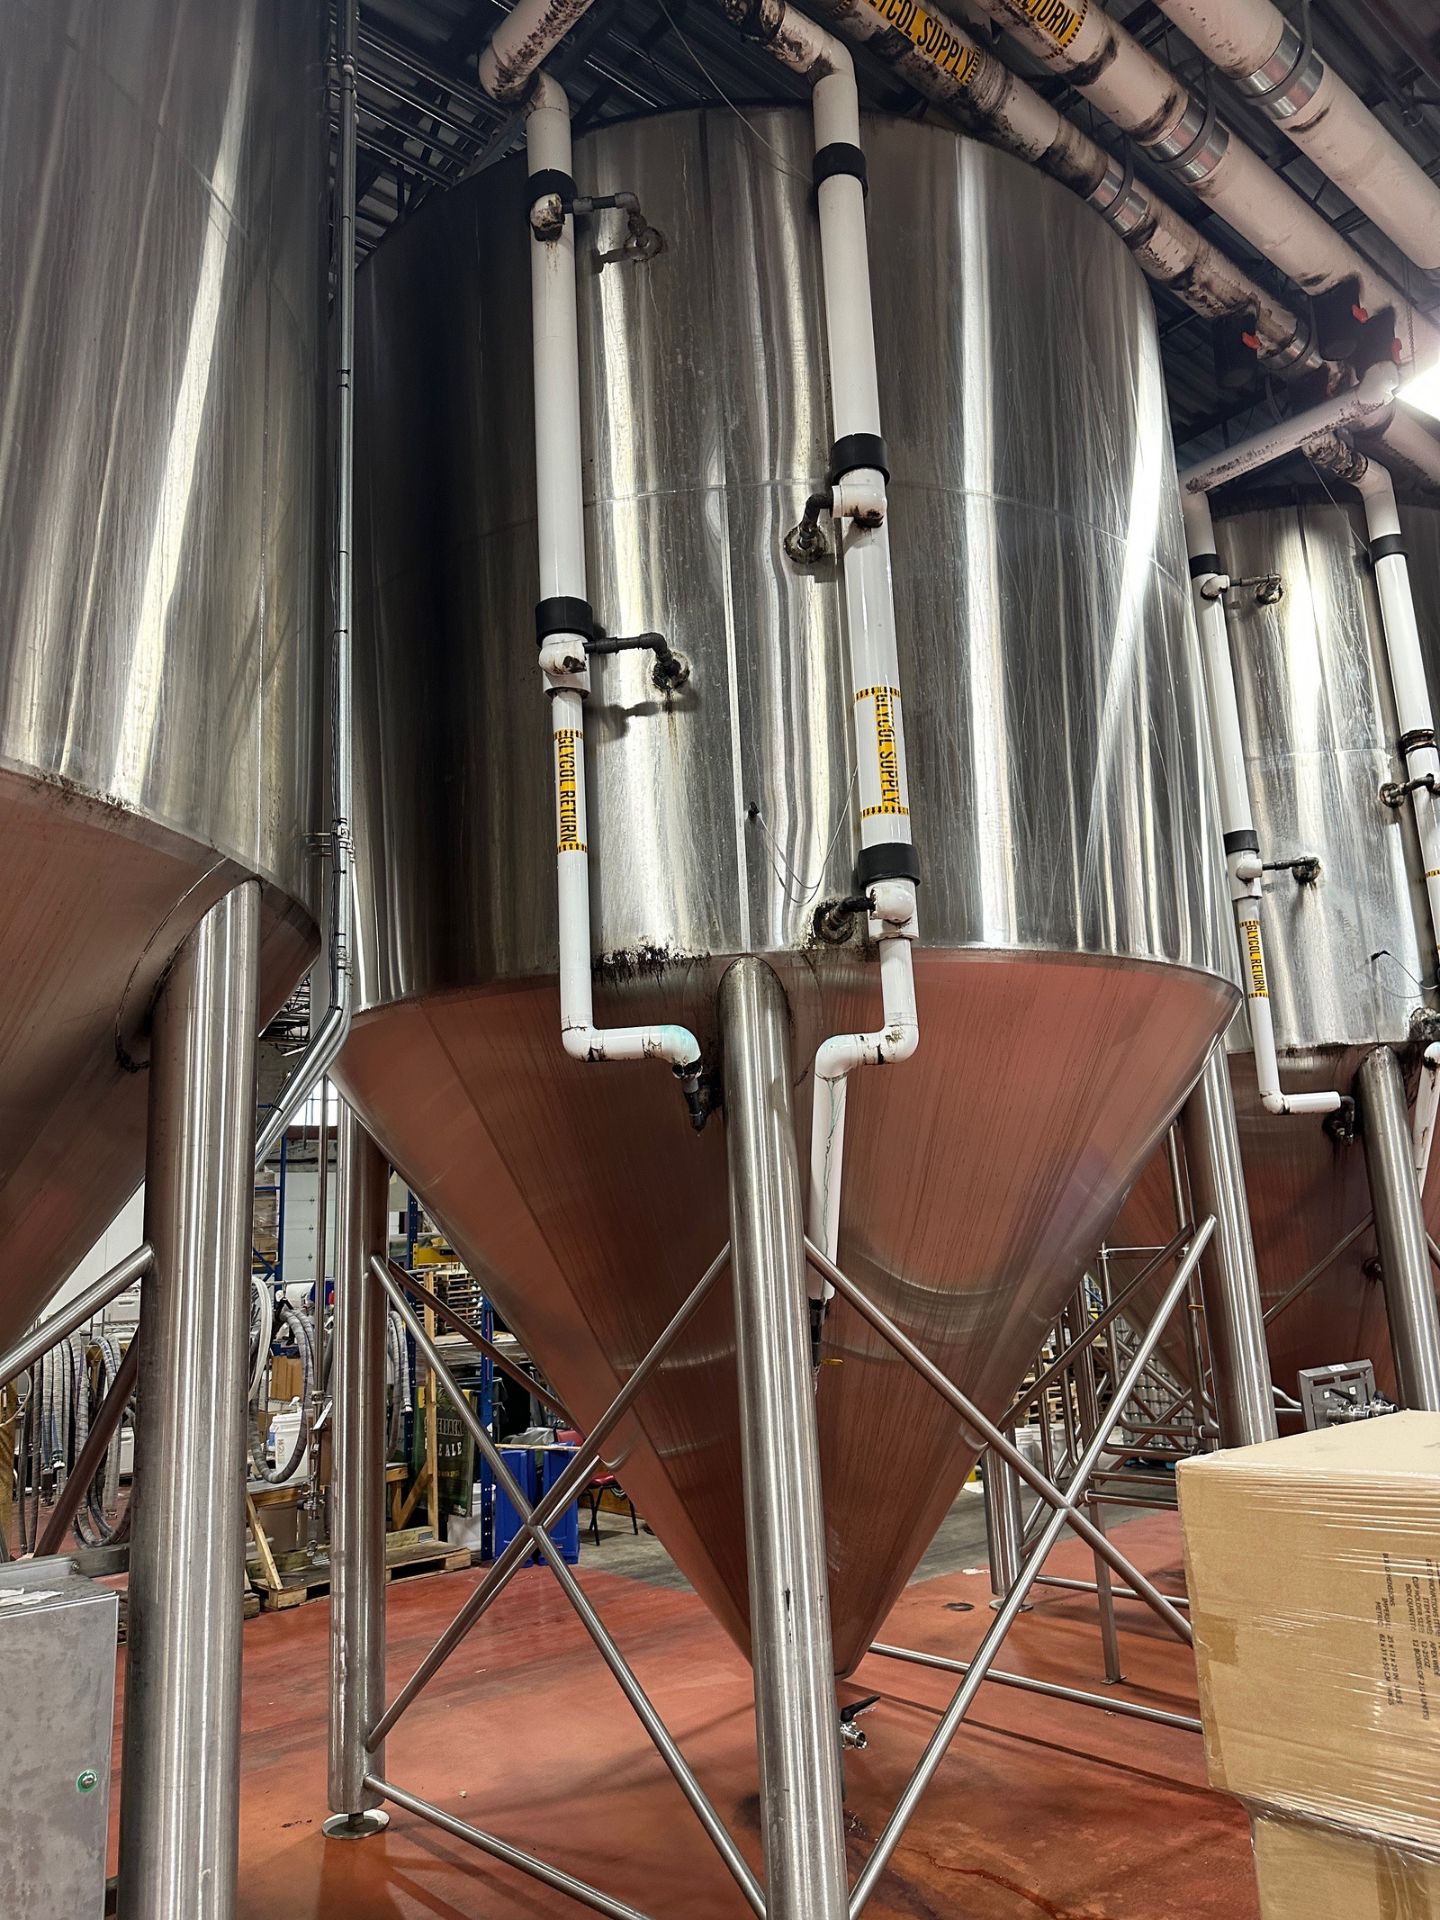 2016 - 300 BBL Specific Mechanical Stainless Steel Fermentation Tank - Cone Bottom, | Rig Fee $2900 - Image 5 of 6